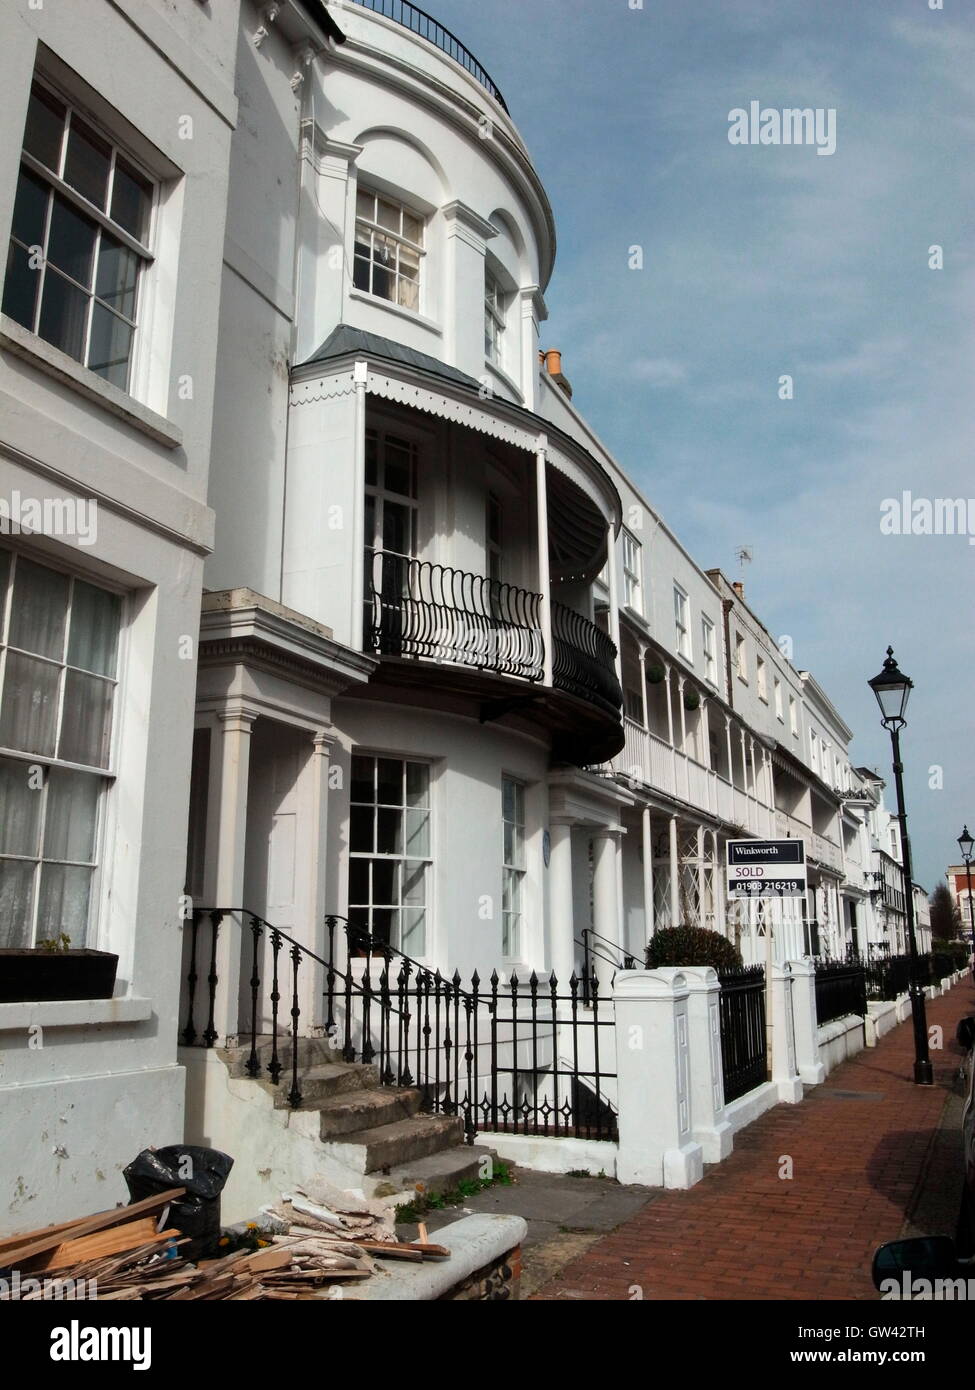 AJAXNETPHOTO. 2016. WORTHING, ENGLAND. - PLAYWRIGHT'S HOME - BALCONIED BUILDING (CENTRE) NEAR THE CONNAUGHT THEATRE WAS ONCE HOME OF THE PLAYWRIGHT HAROLD PINTER.  PHOTO:JONATHAN EASTLAND/AJAX  REF:GX161507 943 Stock Photo